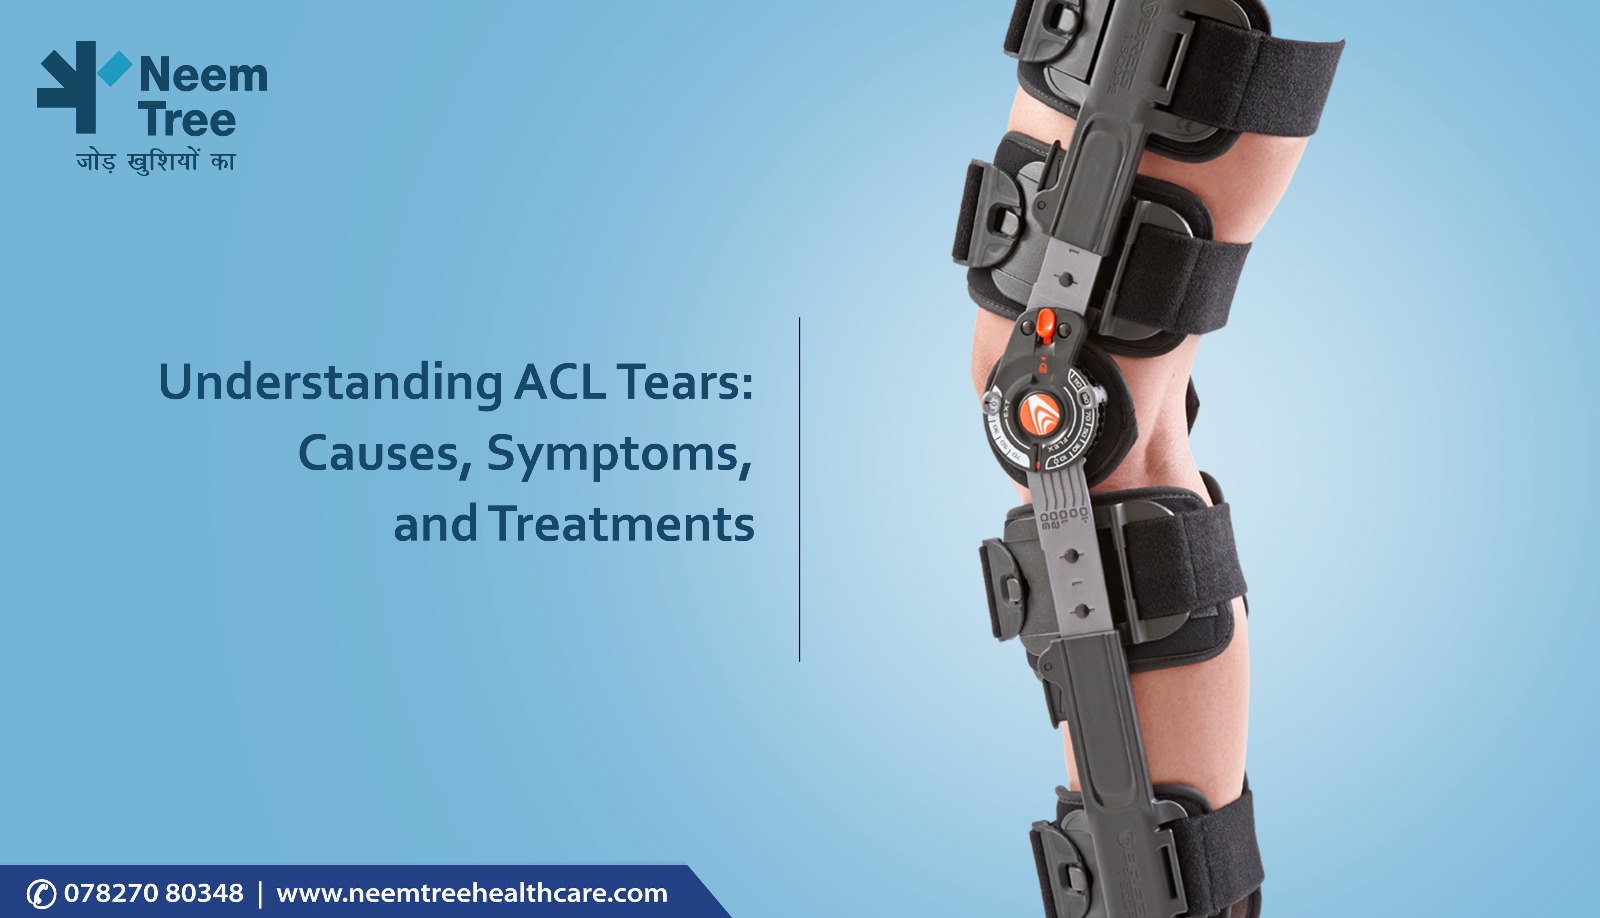 Understanding ACL Tears: Causes, Symptoms, and Treatments